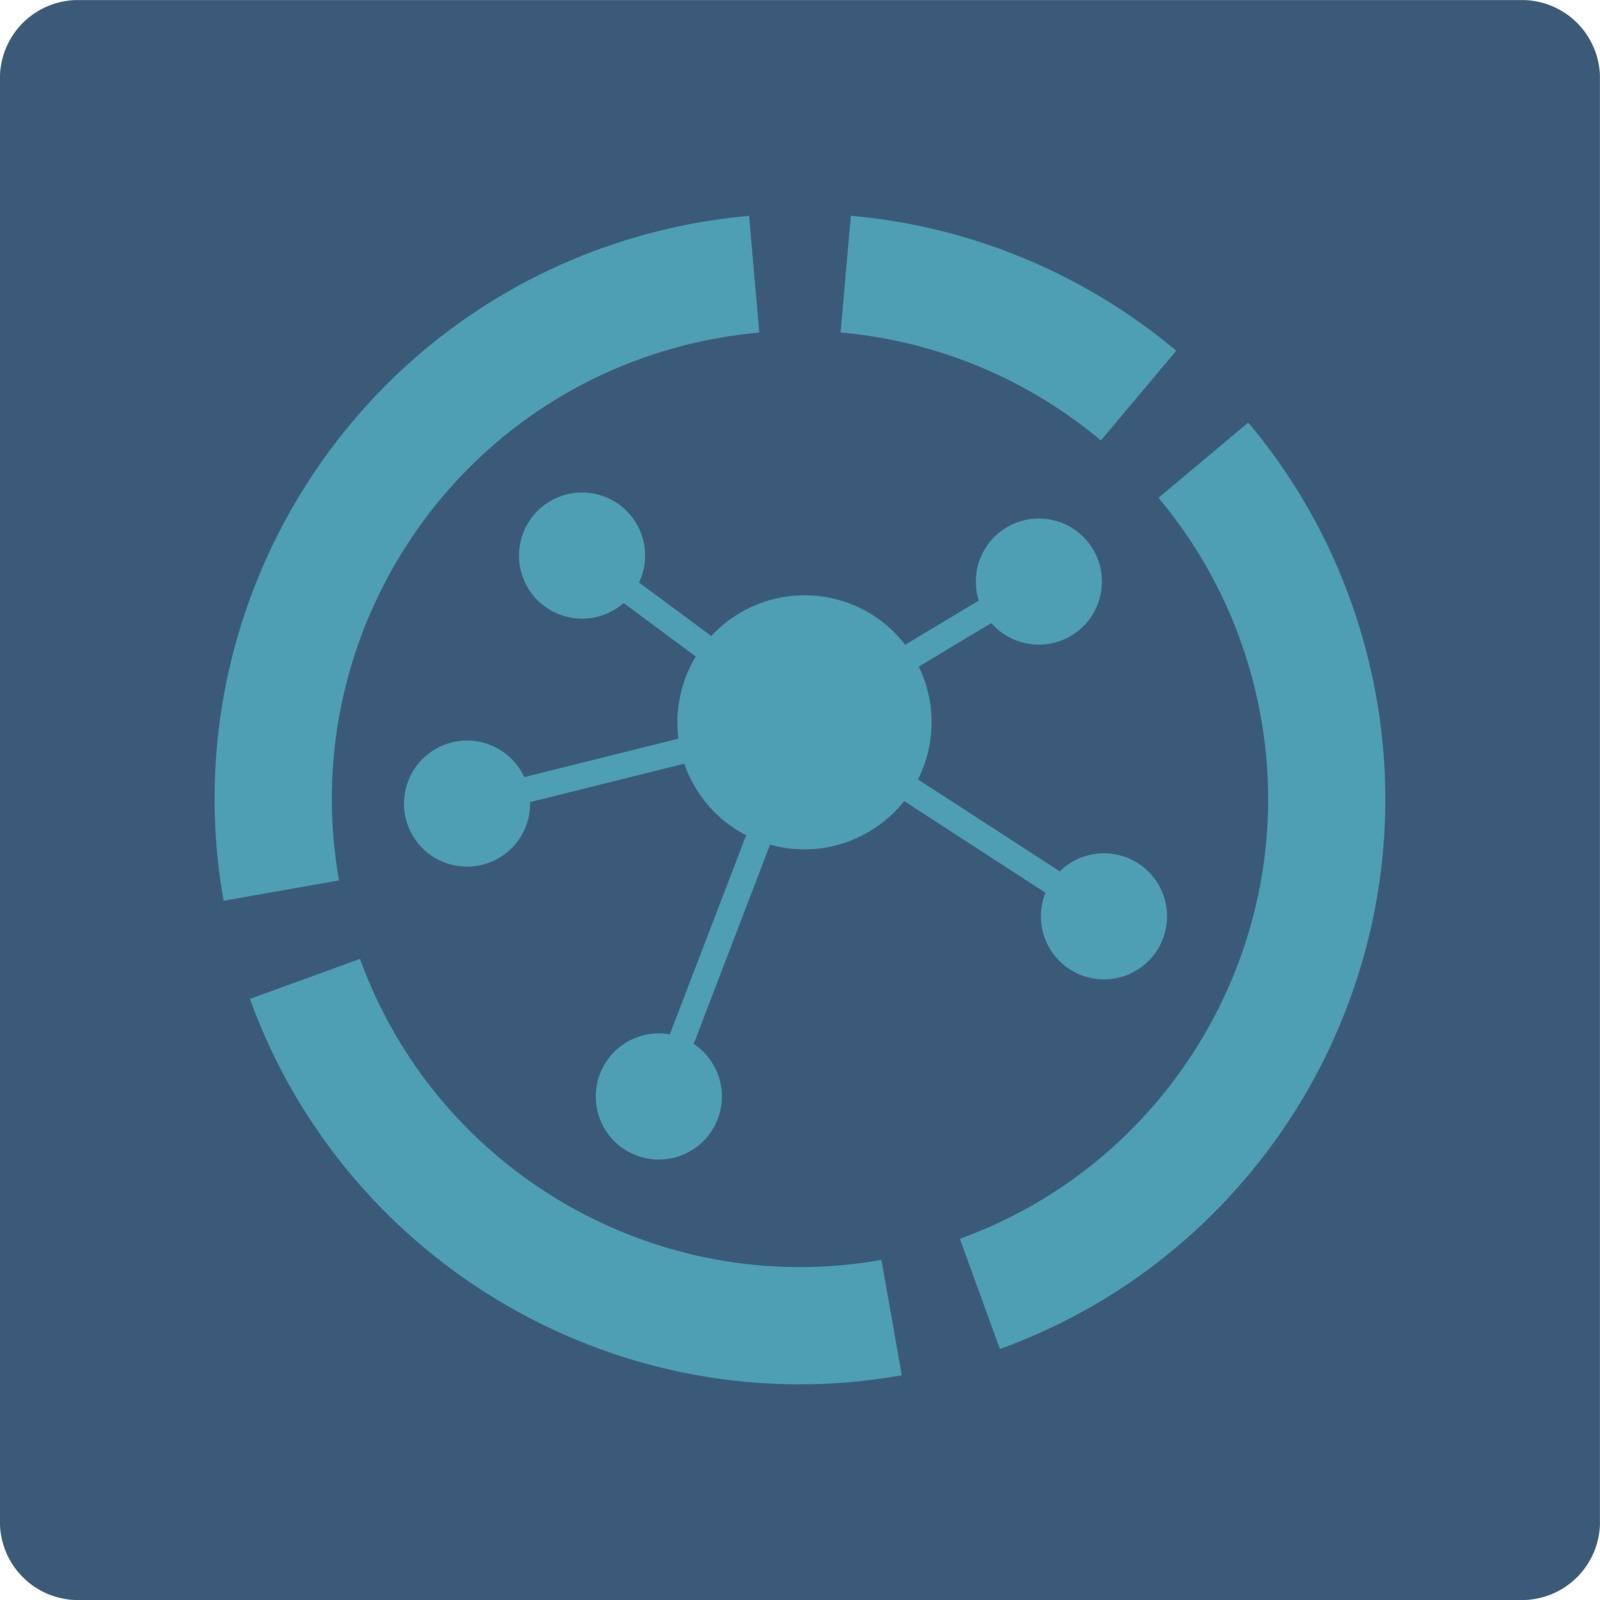 Connections diagram icon. Vector style is cyan and blue colors, flat rounded square button on a white background.